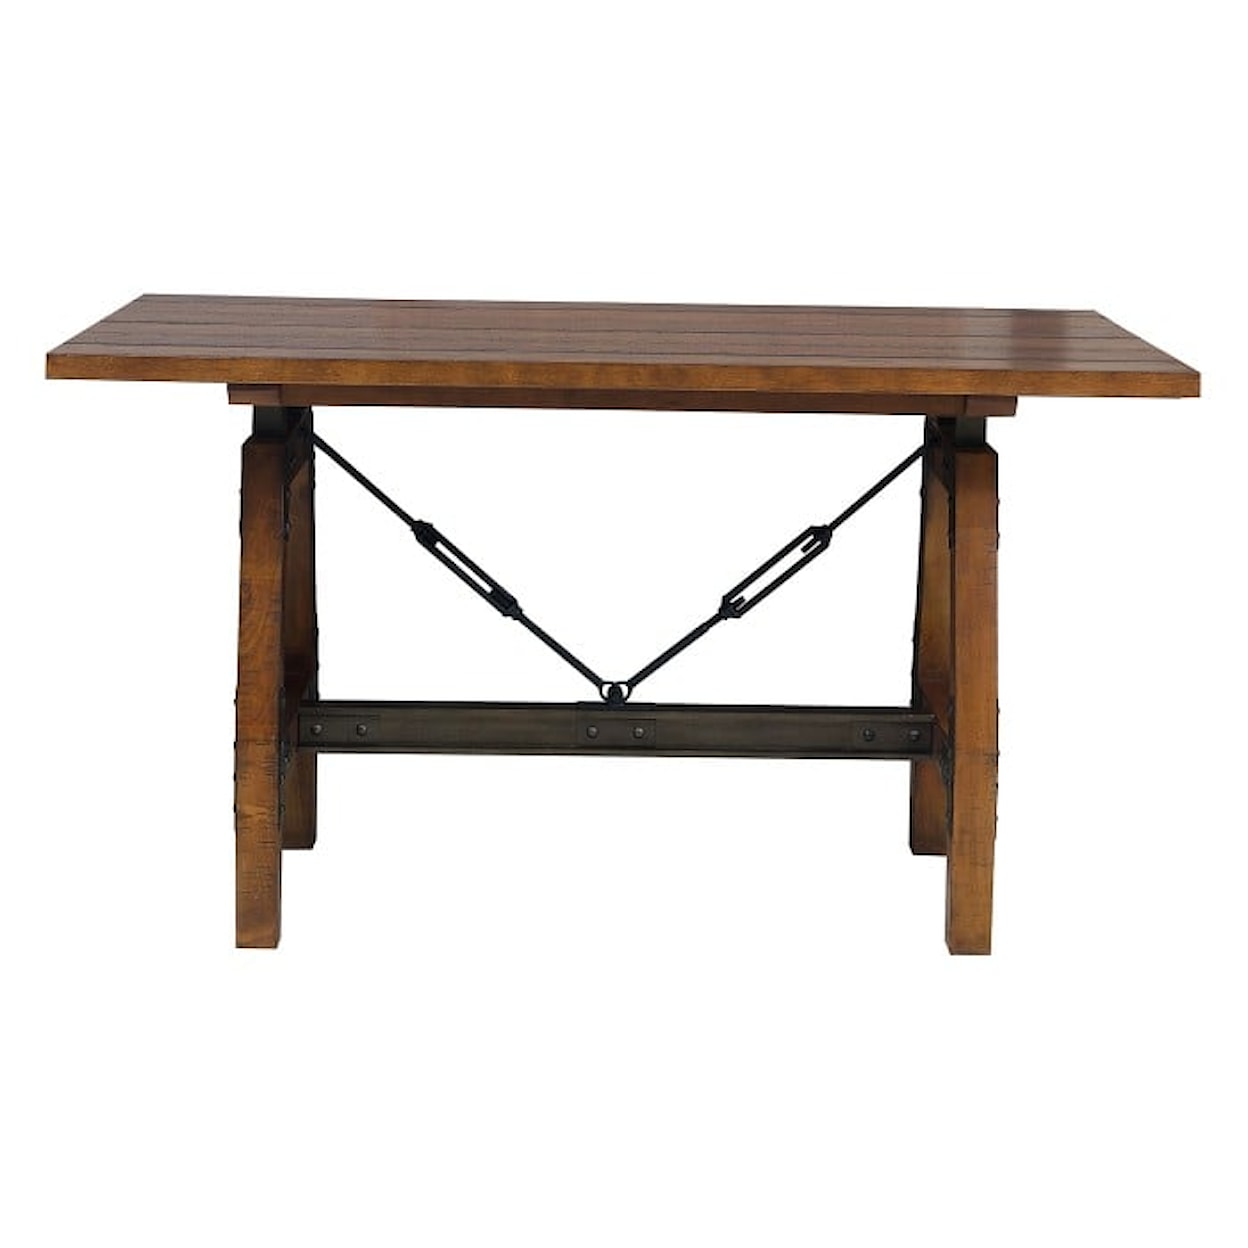 Homelegance Holverson Counter Height Table